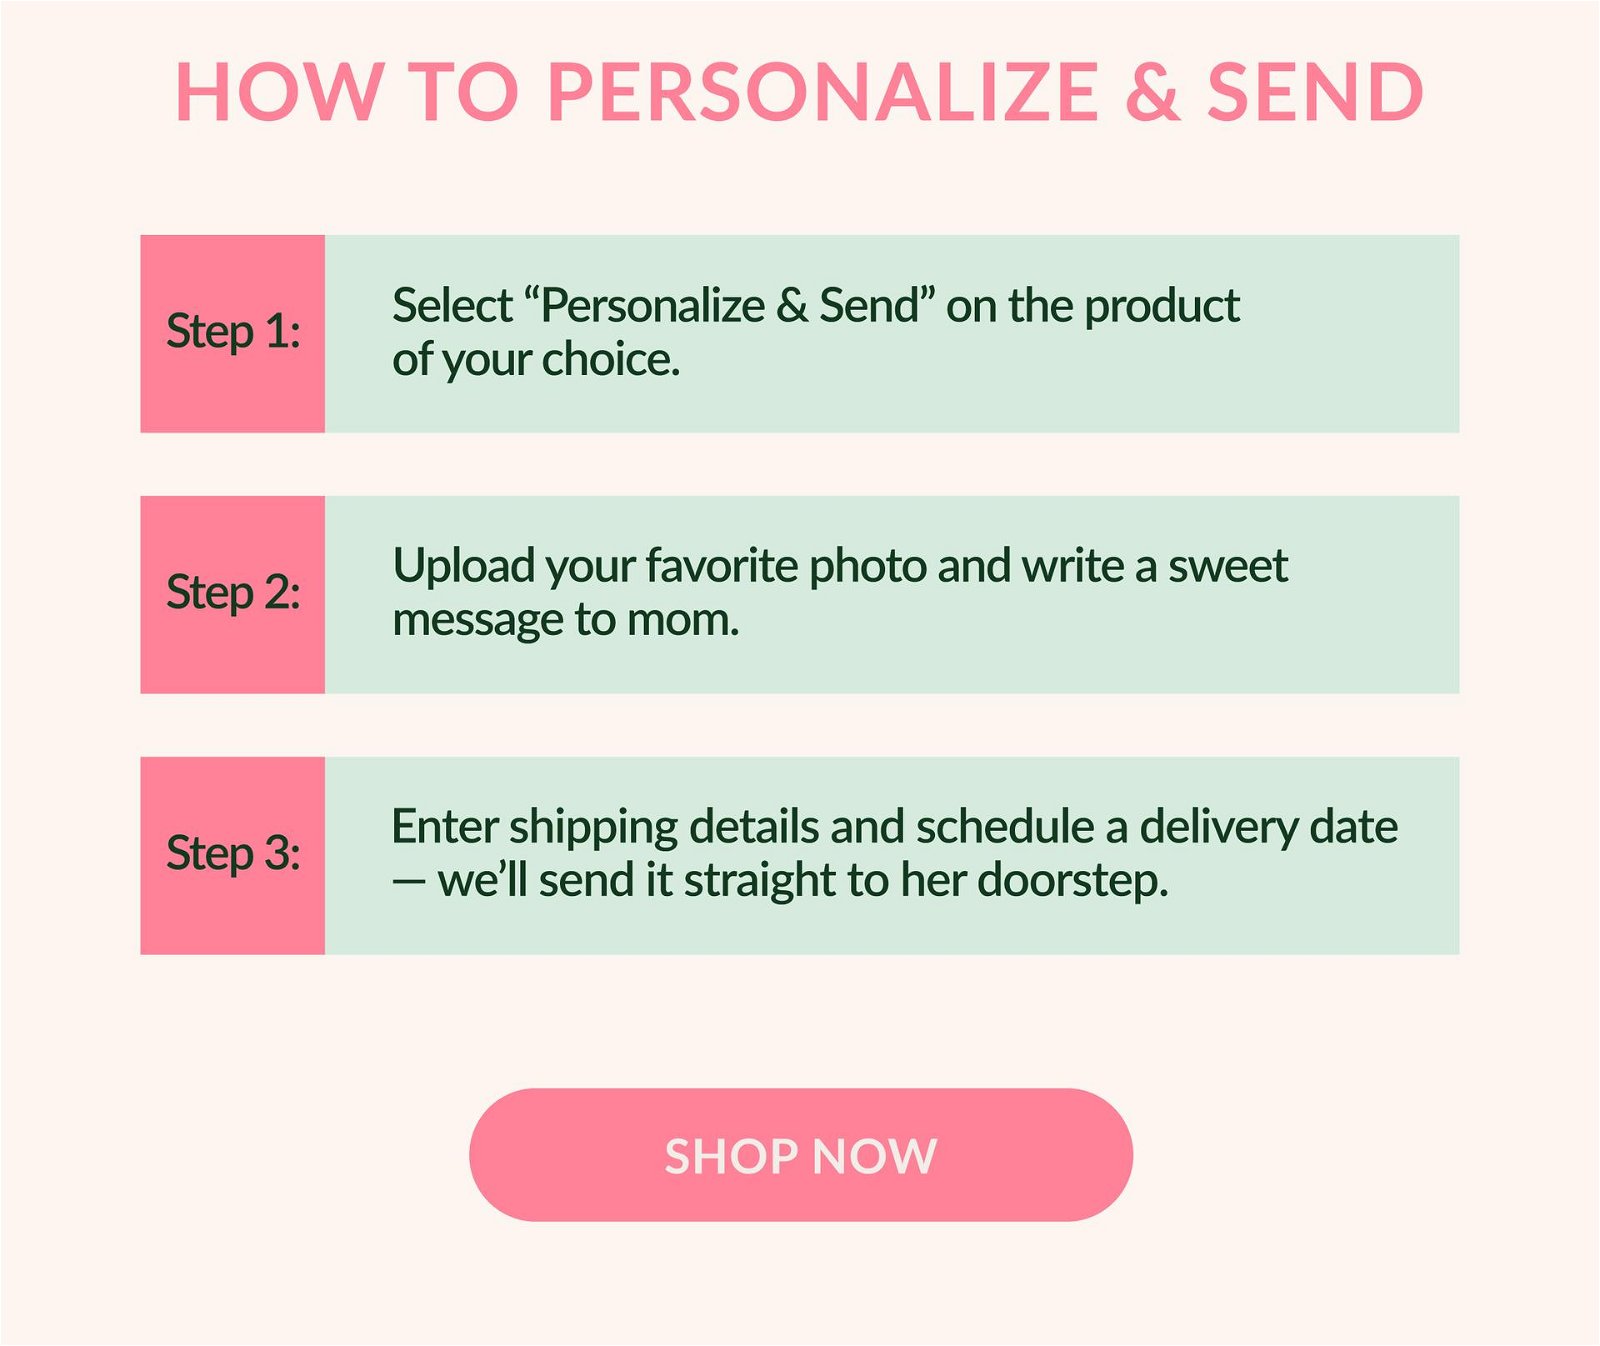 HOW TO PERSONALIZE & SEND | Step 1: Select Personalize & Send on the product of your choice. | Step 2: Upload your favorite photo and write a sweet message to mom. | Step 3: Enter shipping details and schedule a delivery date - we’ll send it straight to her doorstep. | SHOP NOW